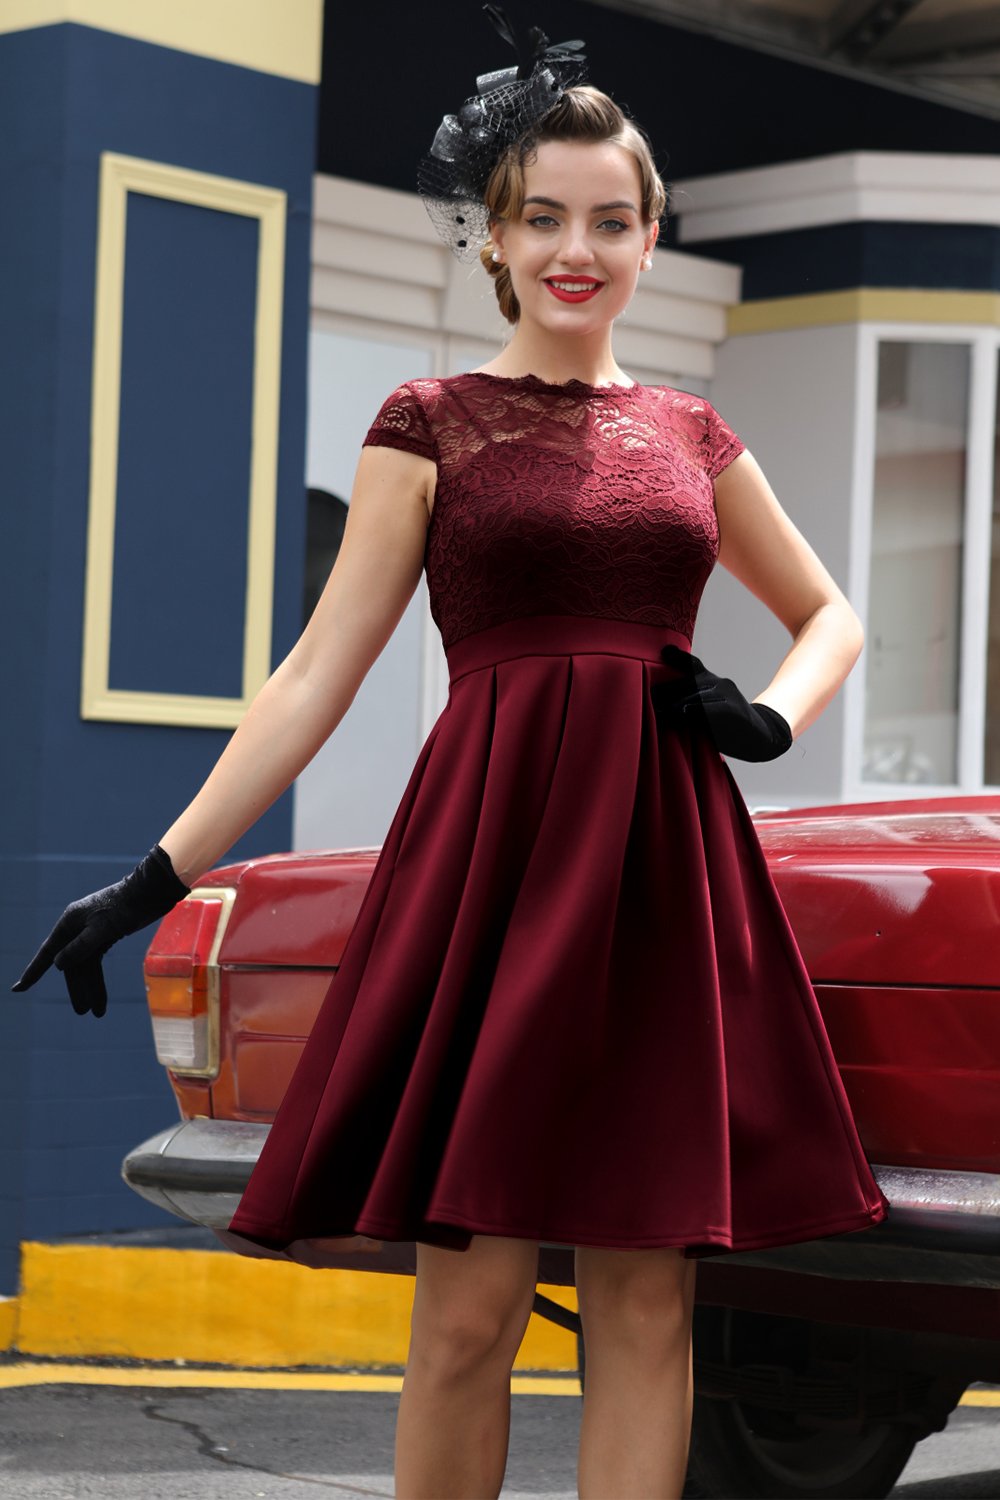 Burgundy Retro 1950s Dress With Lace